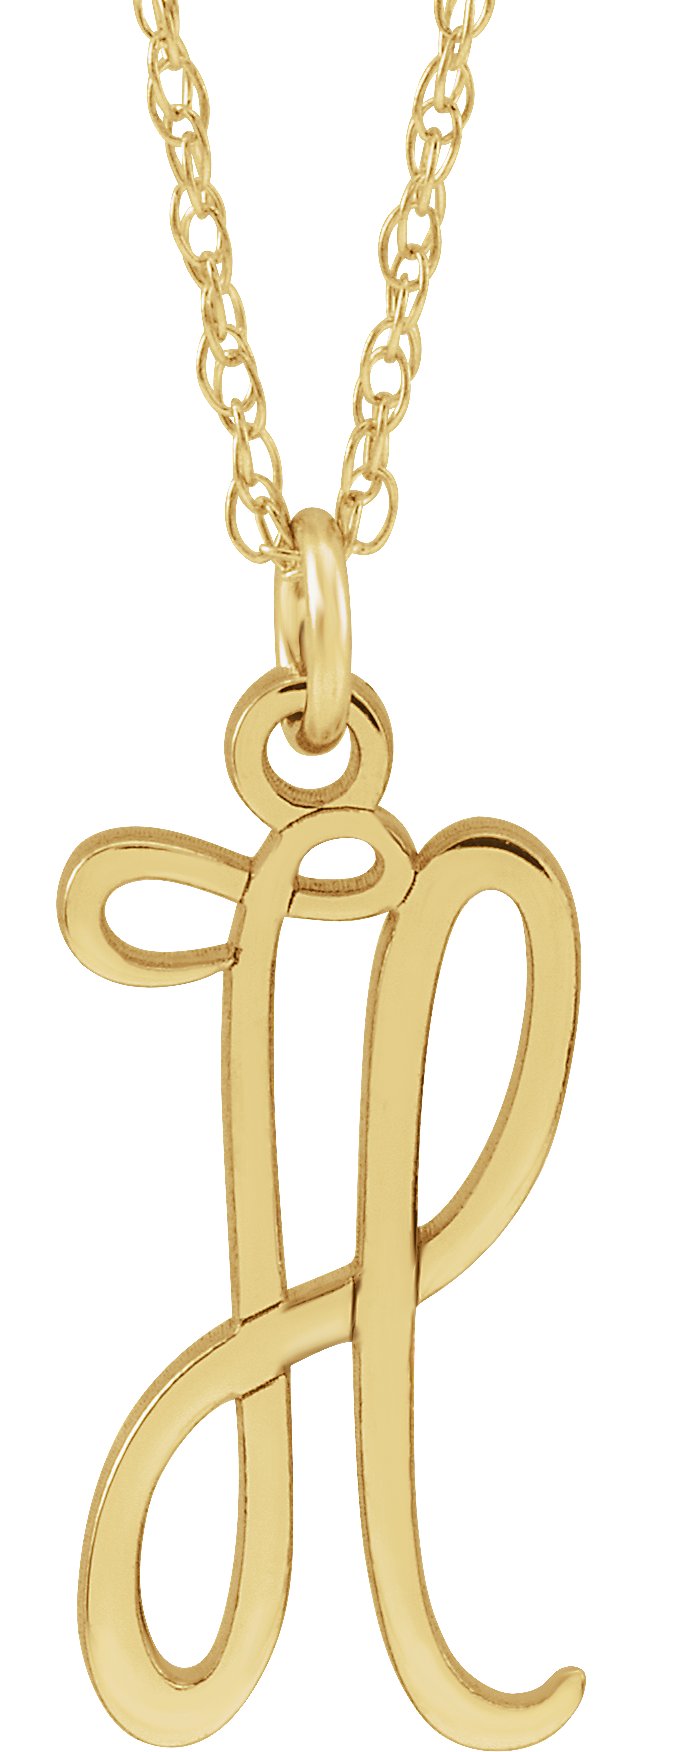 14K Yellow Gold-Plated Sterling Silver Script Initial H 16-18" Necklace